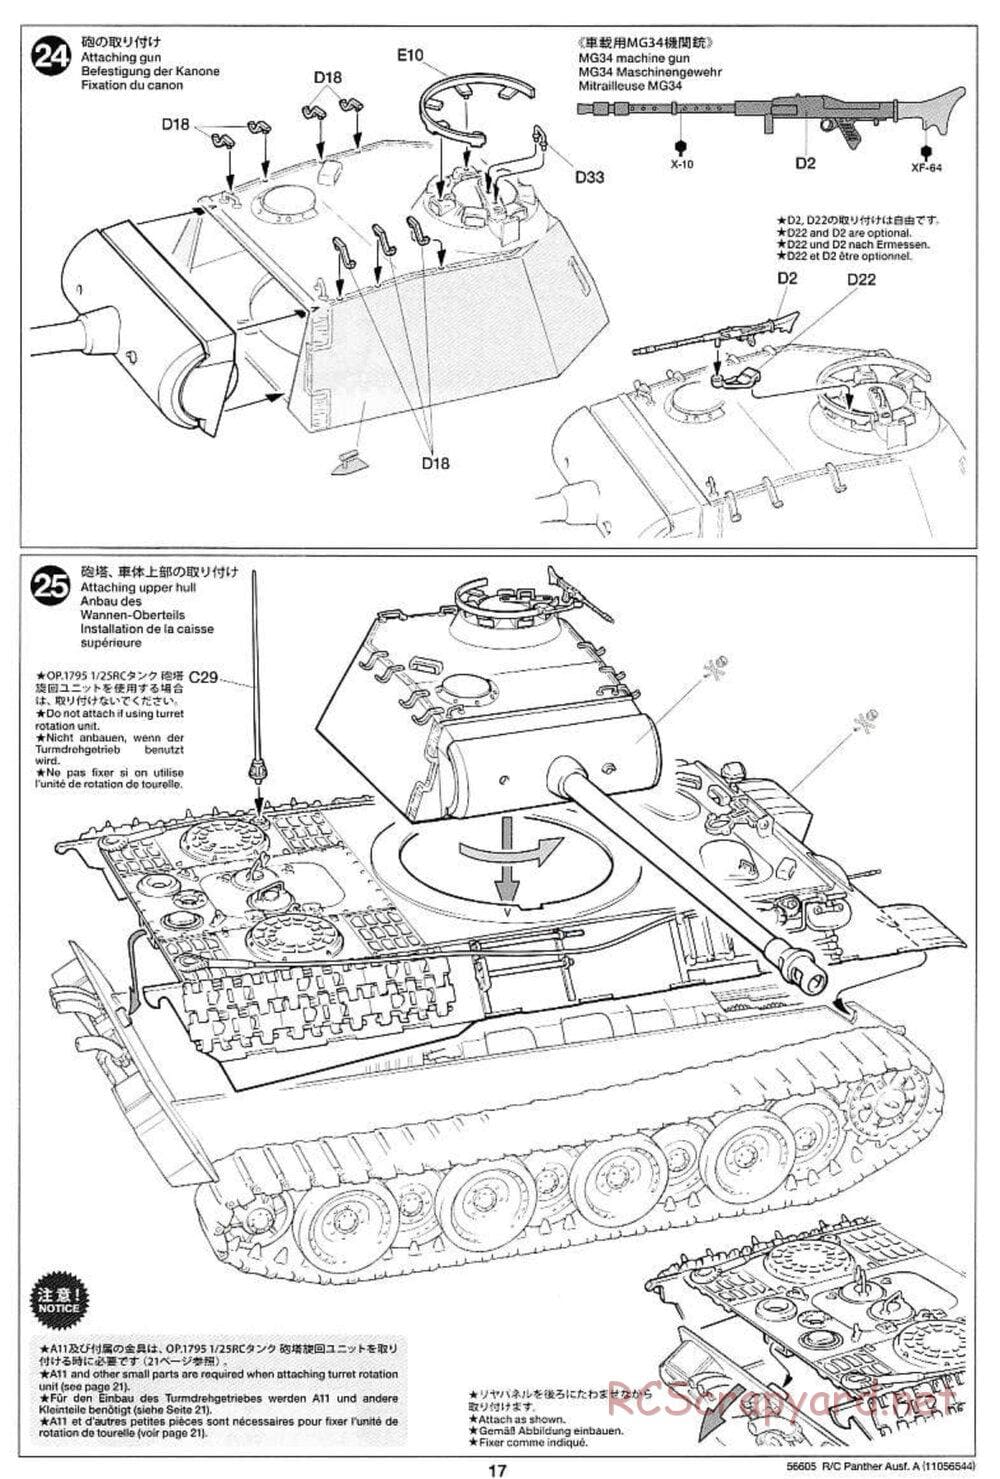 Tamiya - German Tank Panther Ausf.A - 1/25 Scale Chassis - Manual - Page 17